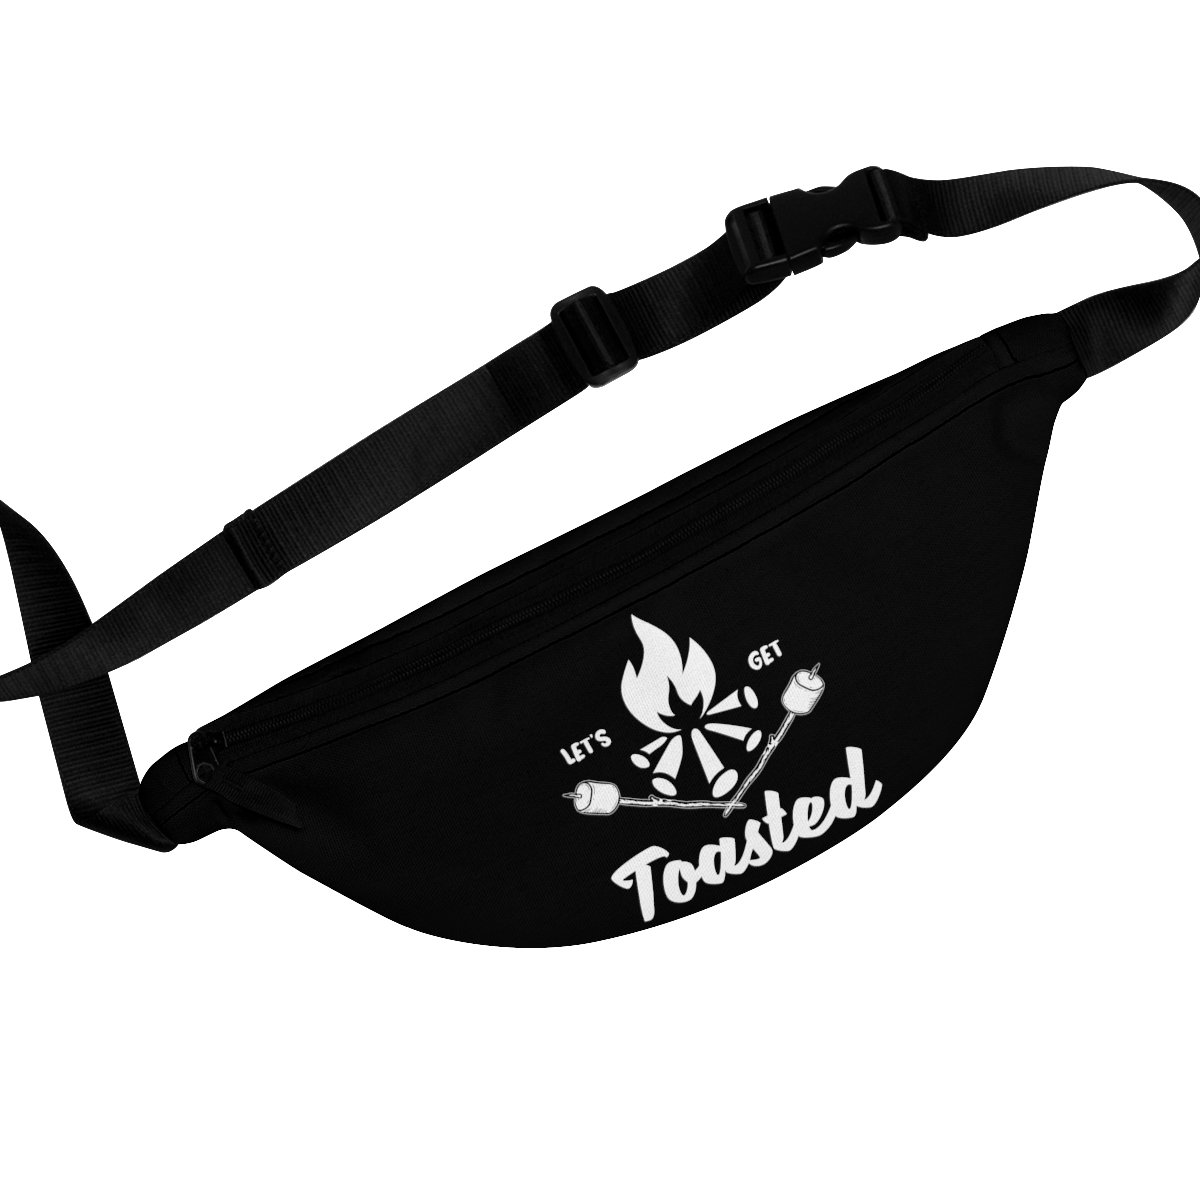 Primary image for Personalised Fanny Pack - Black and White Campfire 'Let's Get Toasted' Design